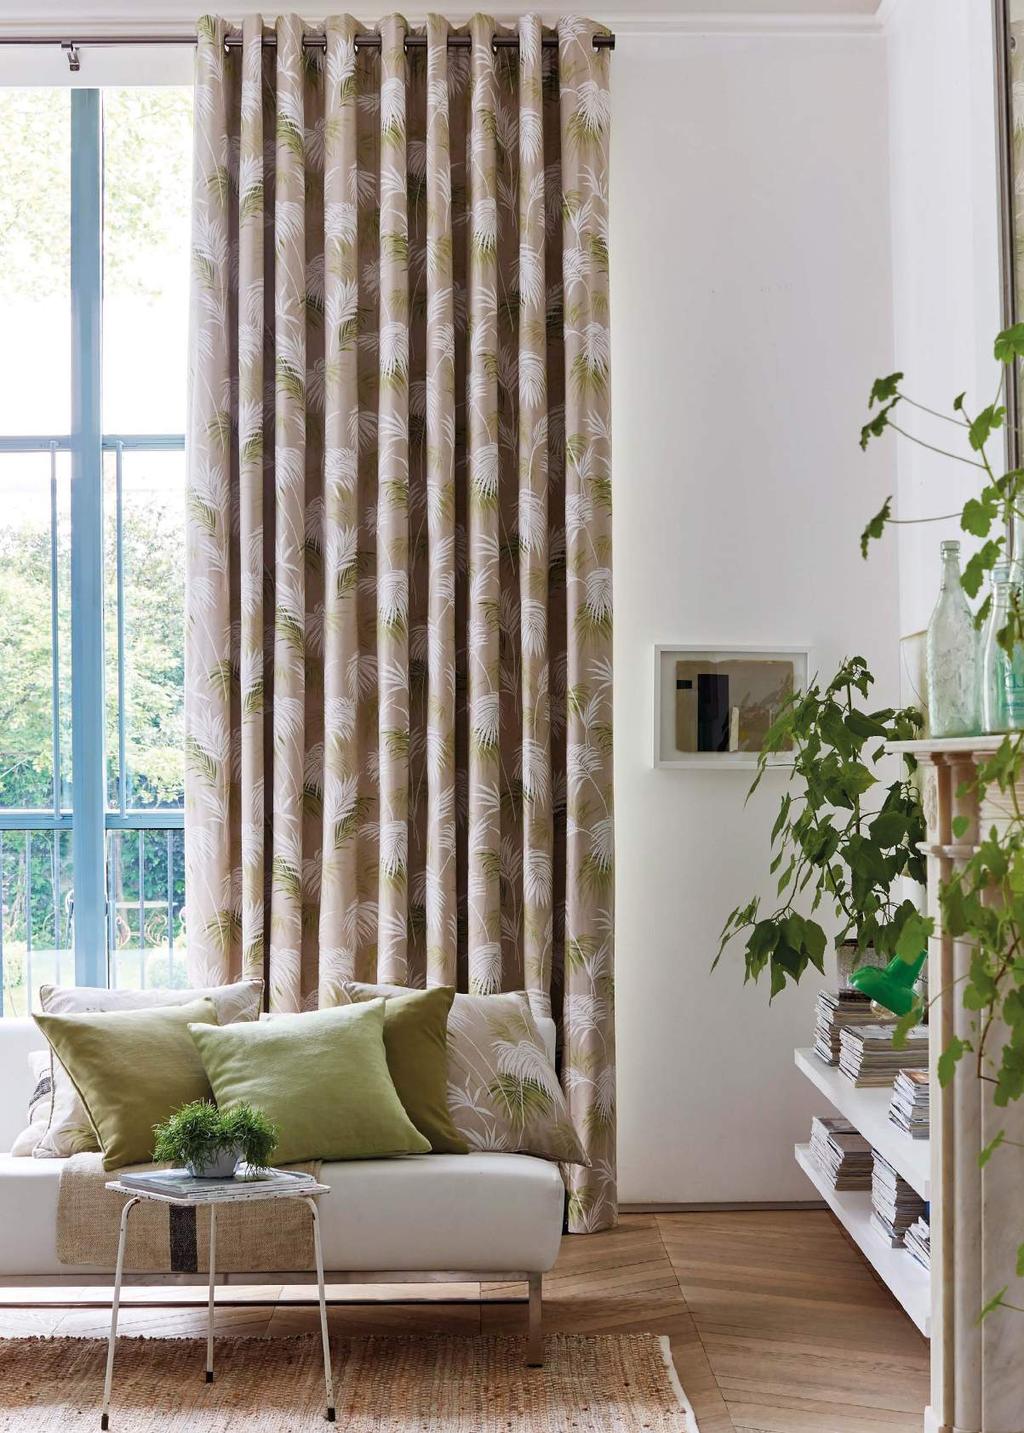 Paradise Willow Green Curtain with co-ordinating cushions from the plains